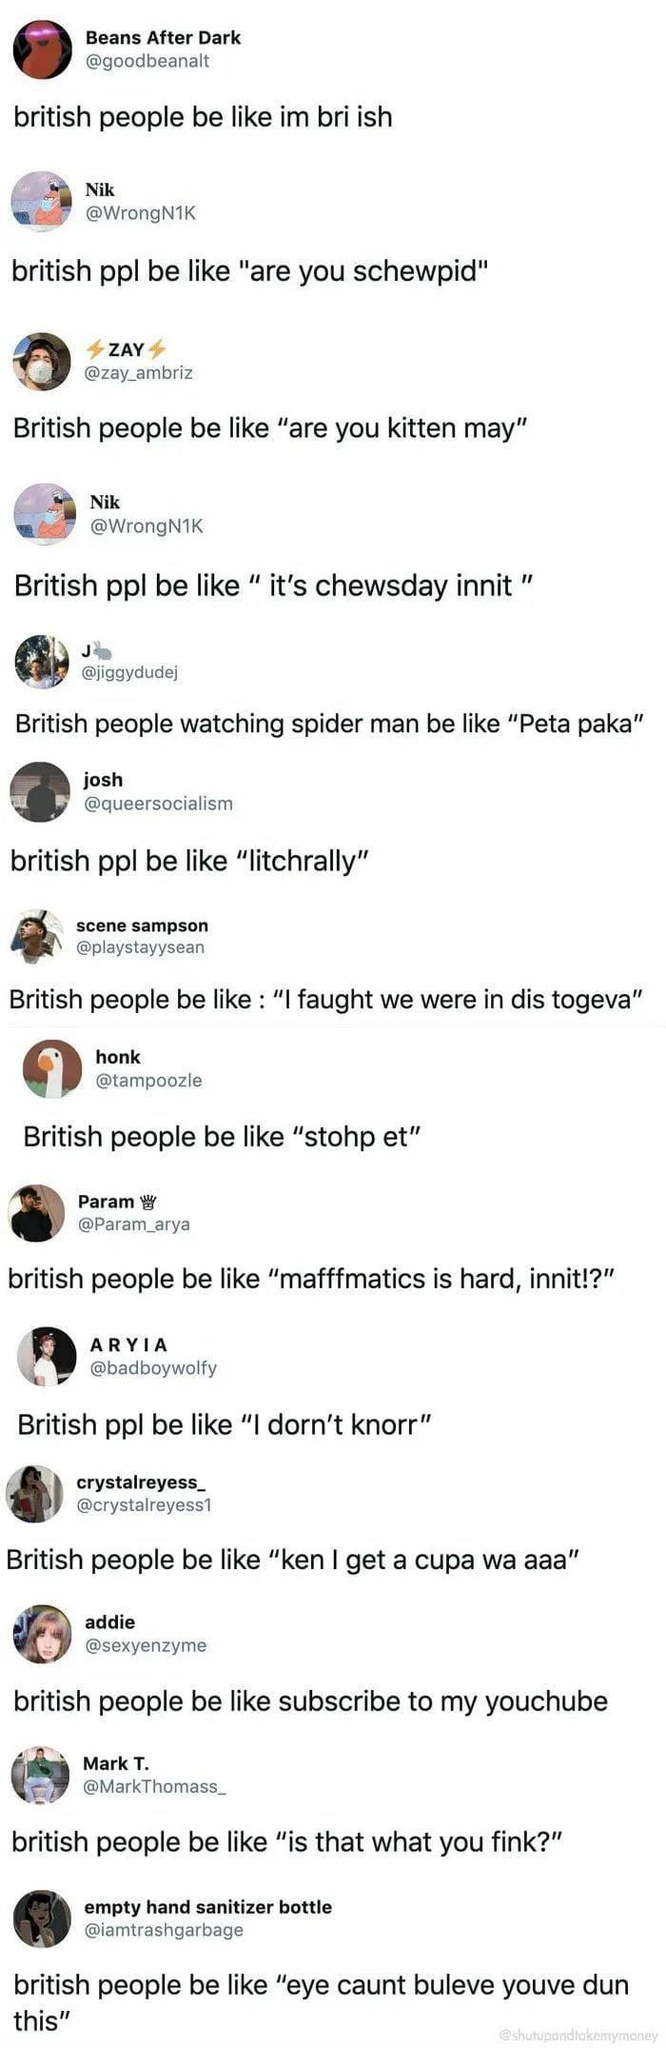 I did it again BritishCunt so please dont be offended - meme